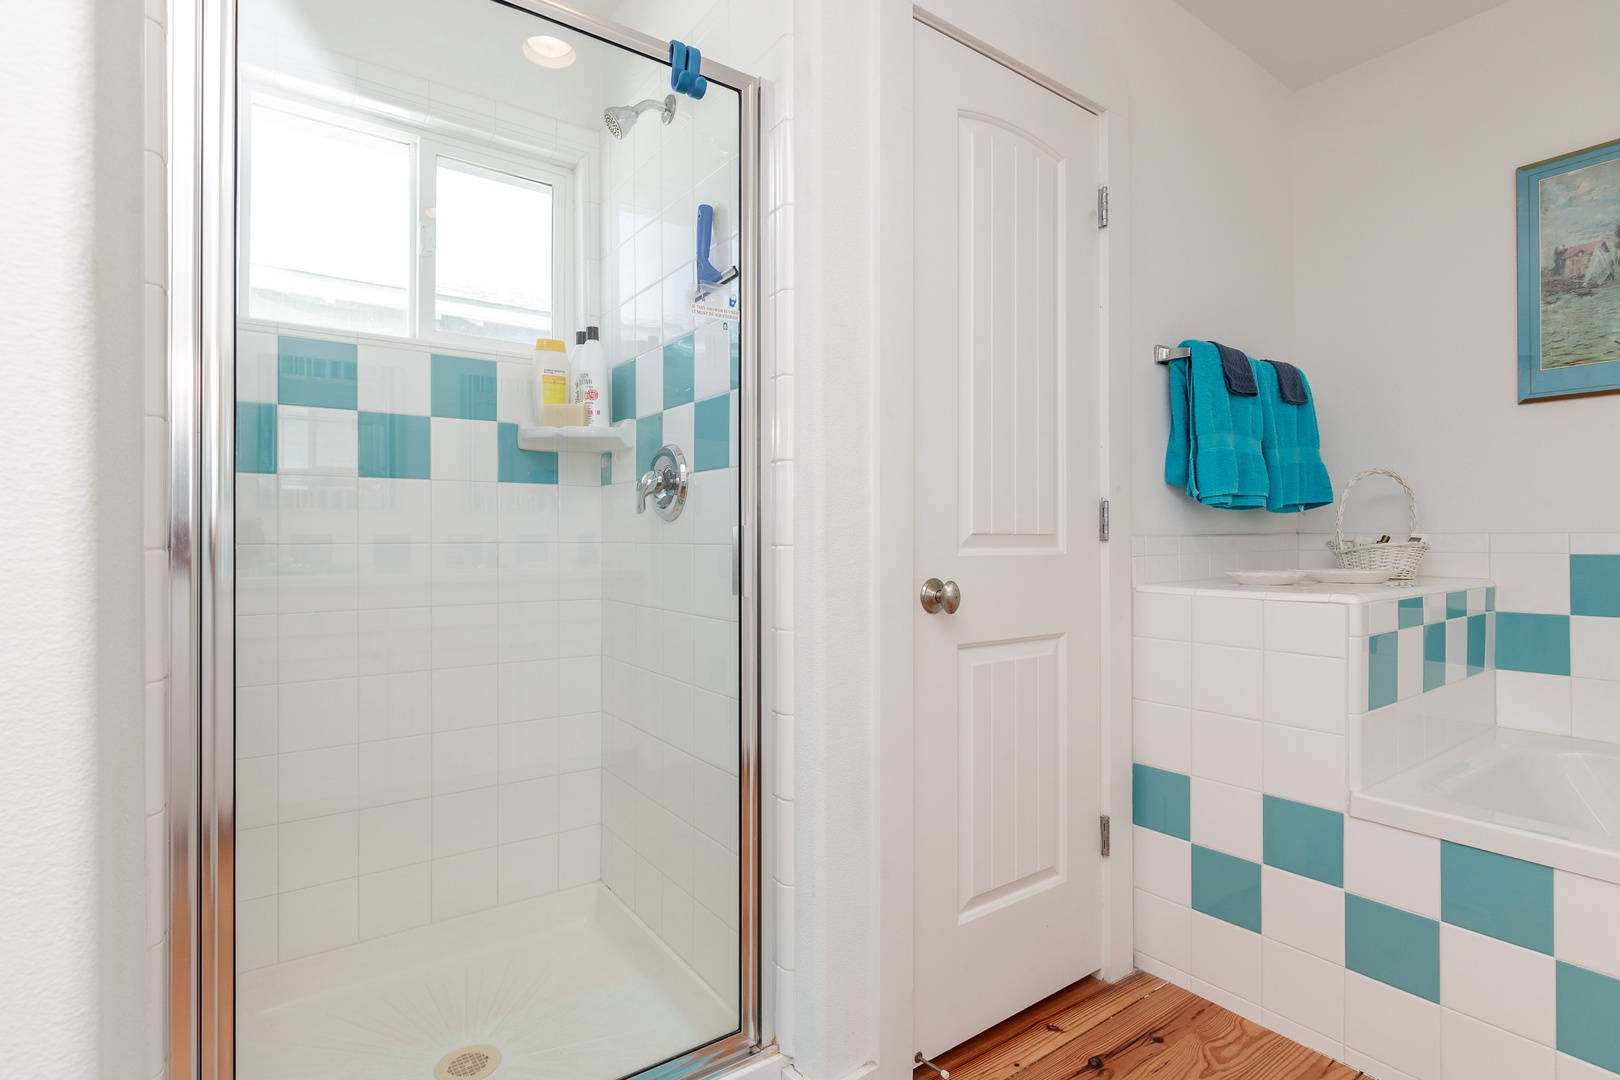 The king en suite boasts an oversized vanity, soaking tub, & glass shower